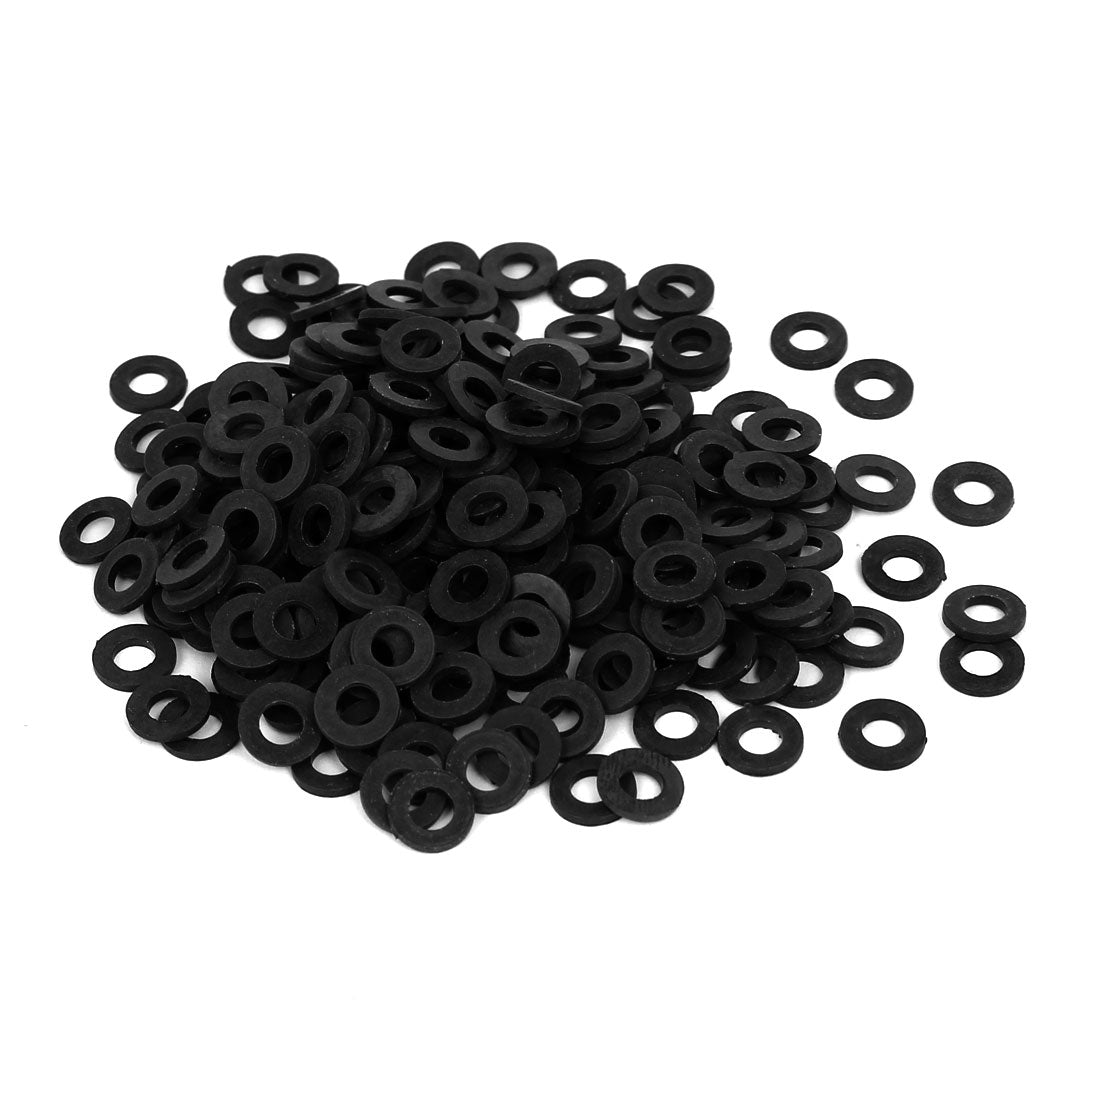 uxcell Uxcell 4mm x 8mm x 1mm Nylon Flat Washers Spacers Gaskets Fastener Black 300PCS